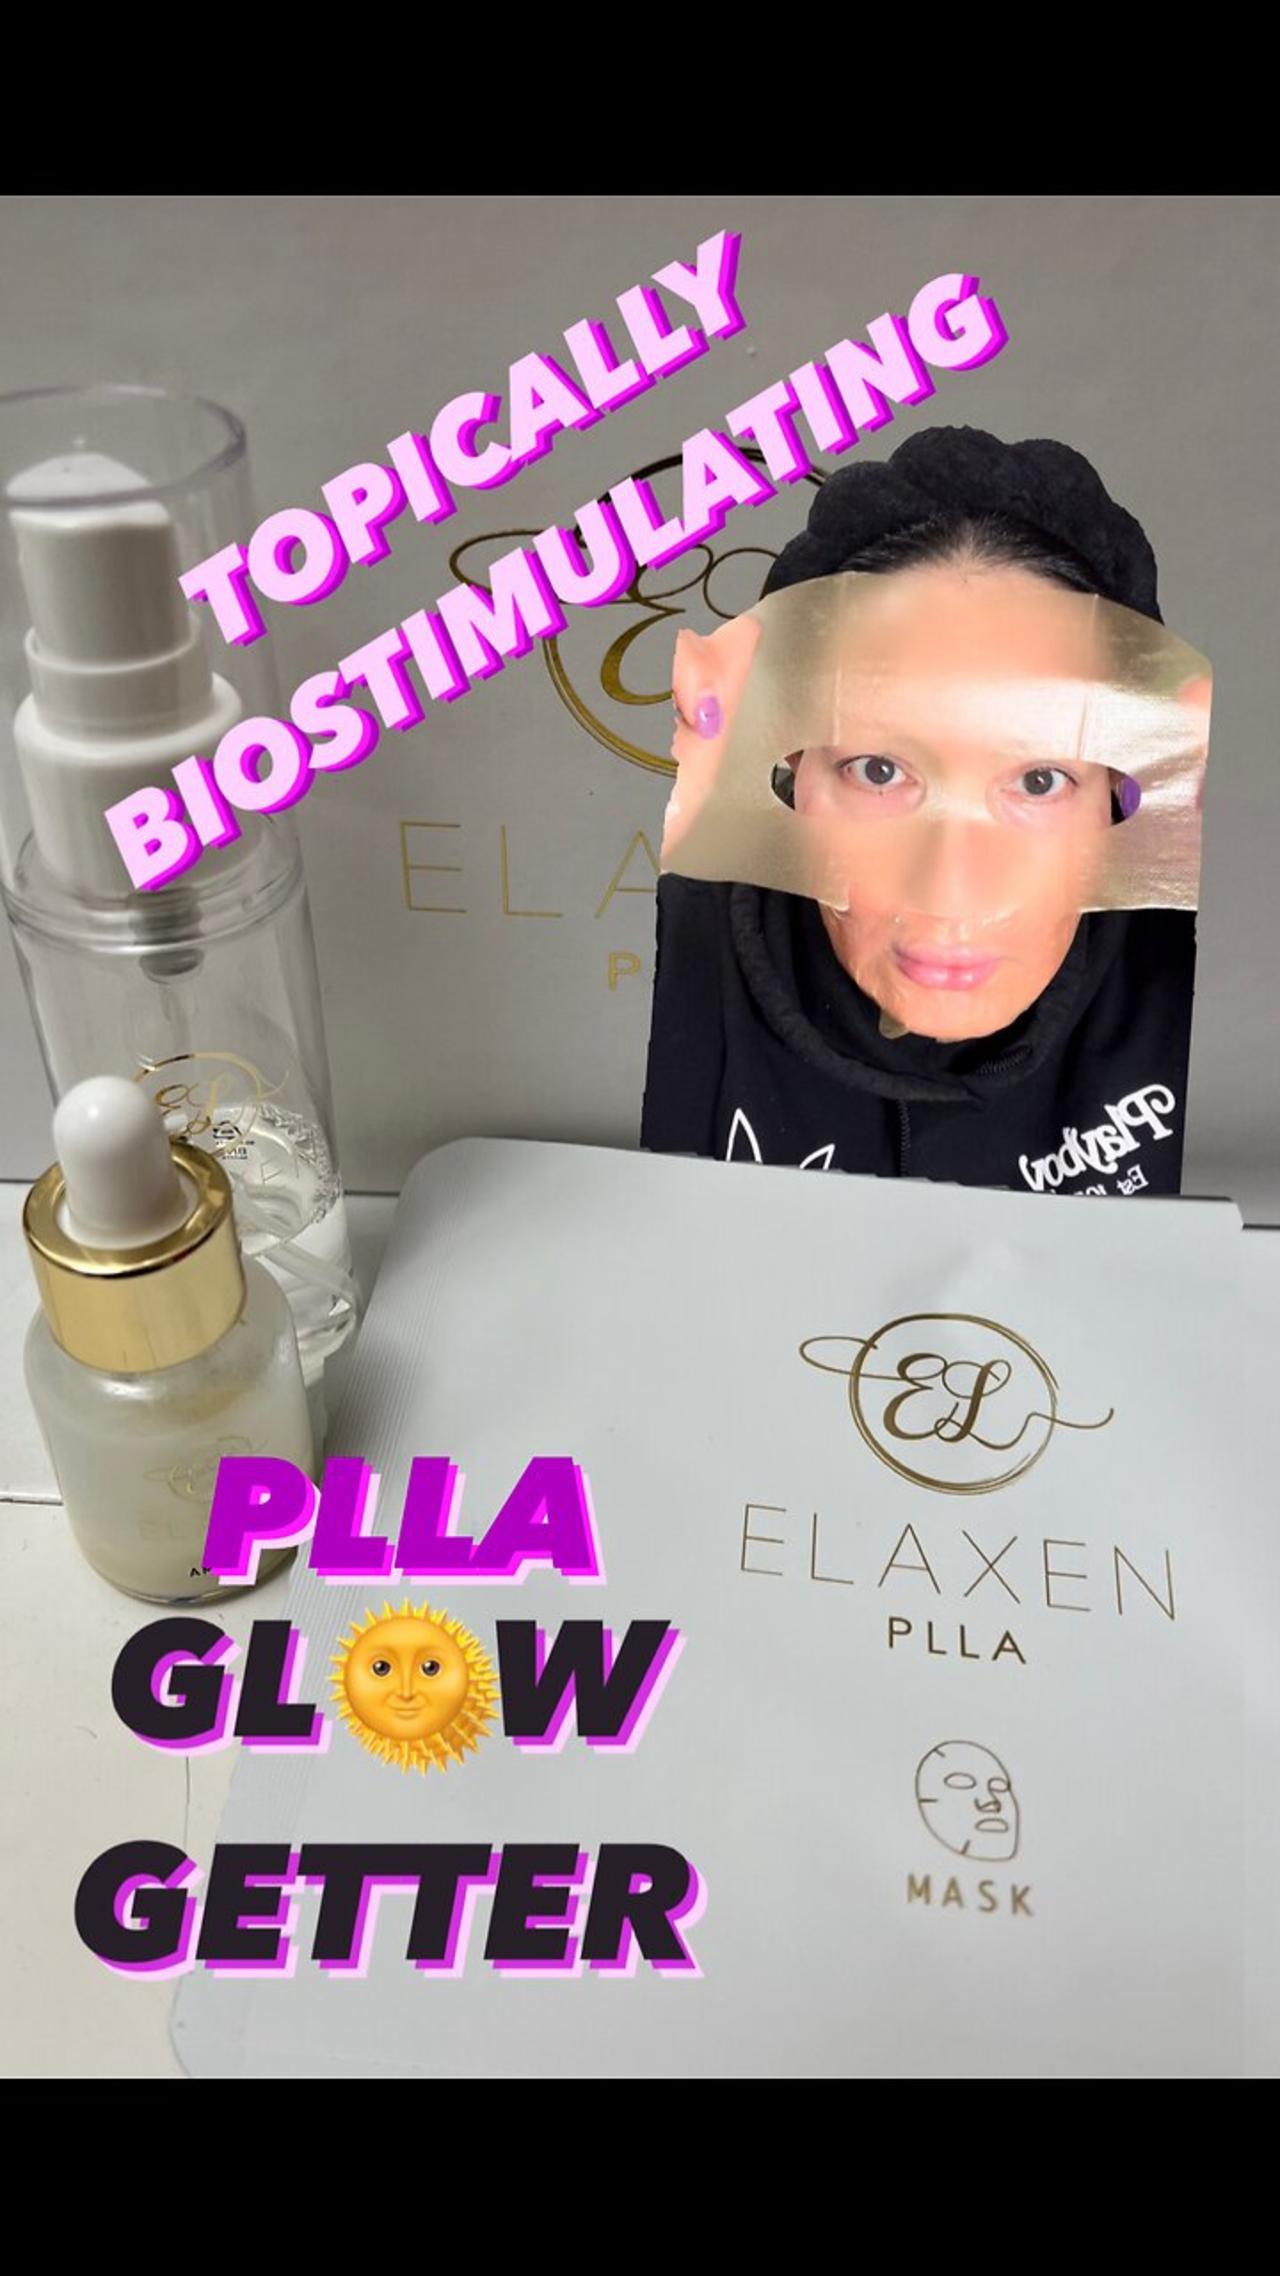 TOPICALLY BIOSTIMULATING with Elaxen PLLA Mask